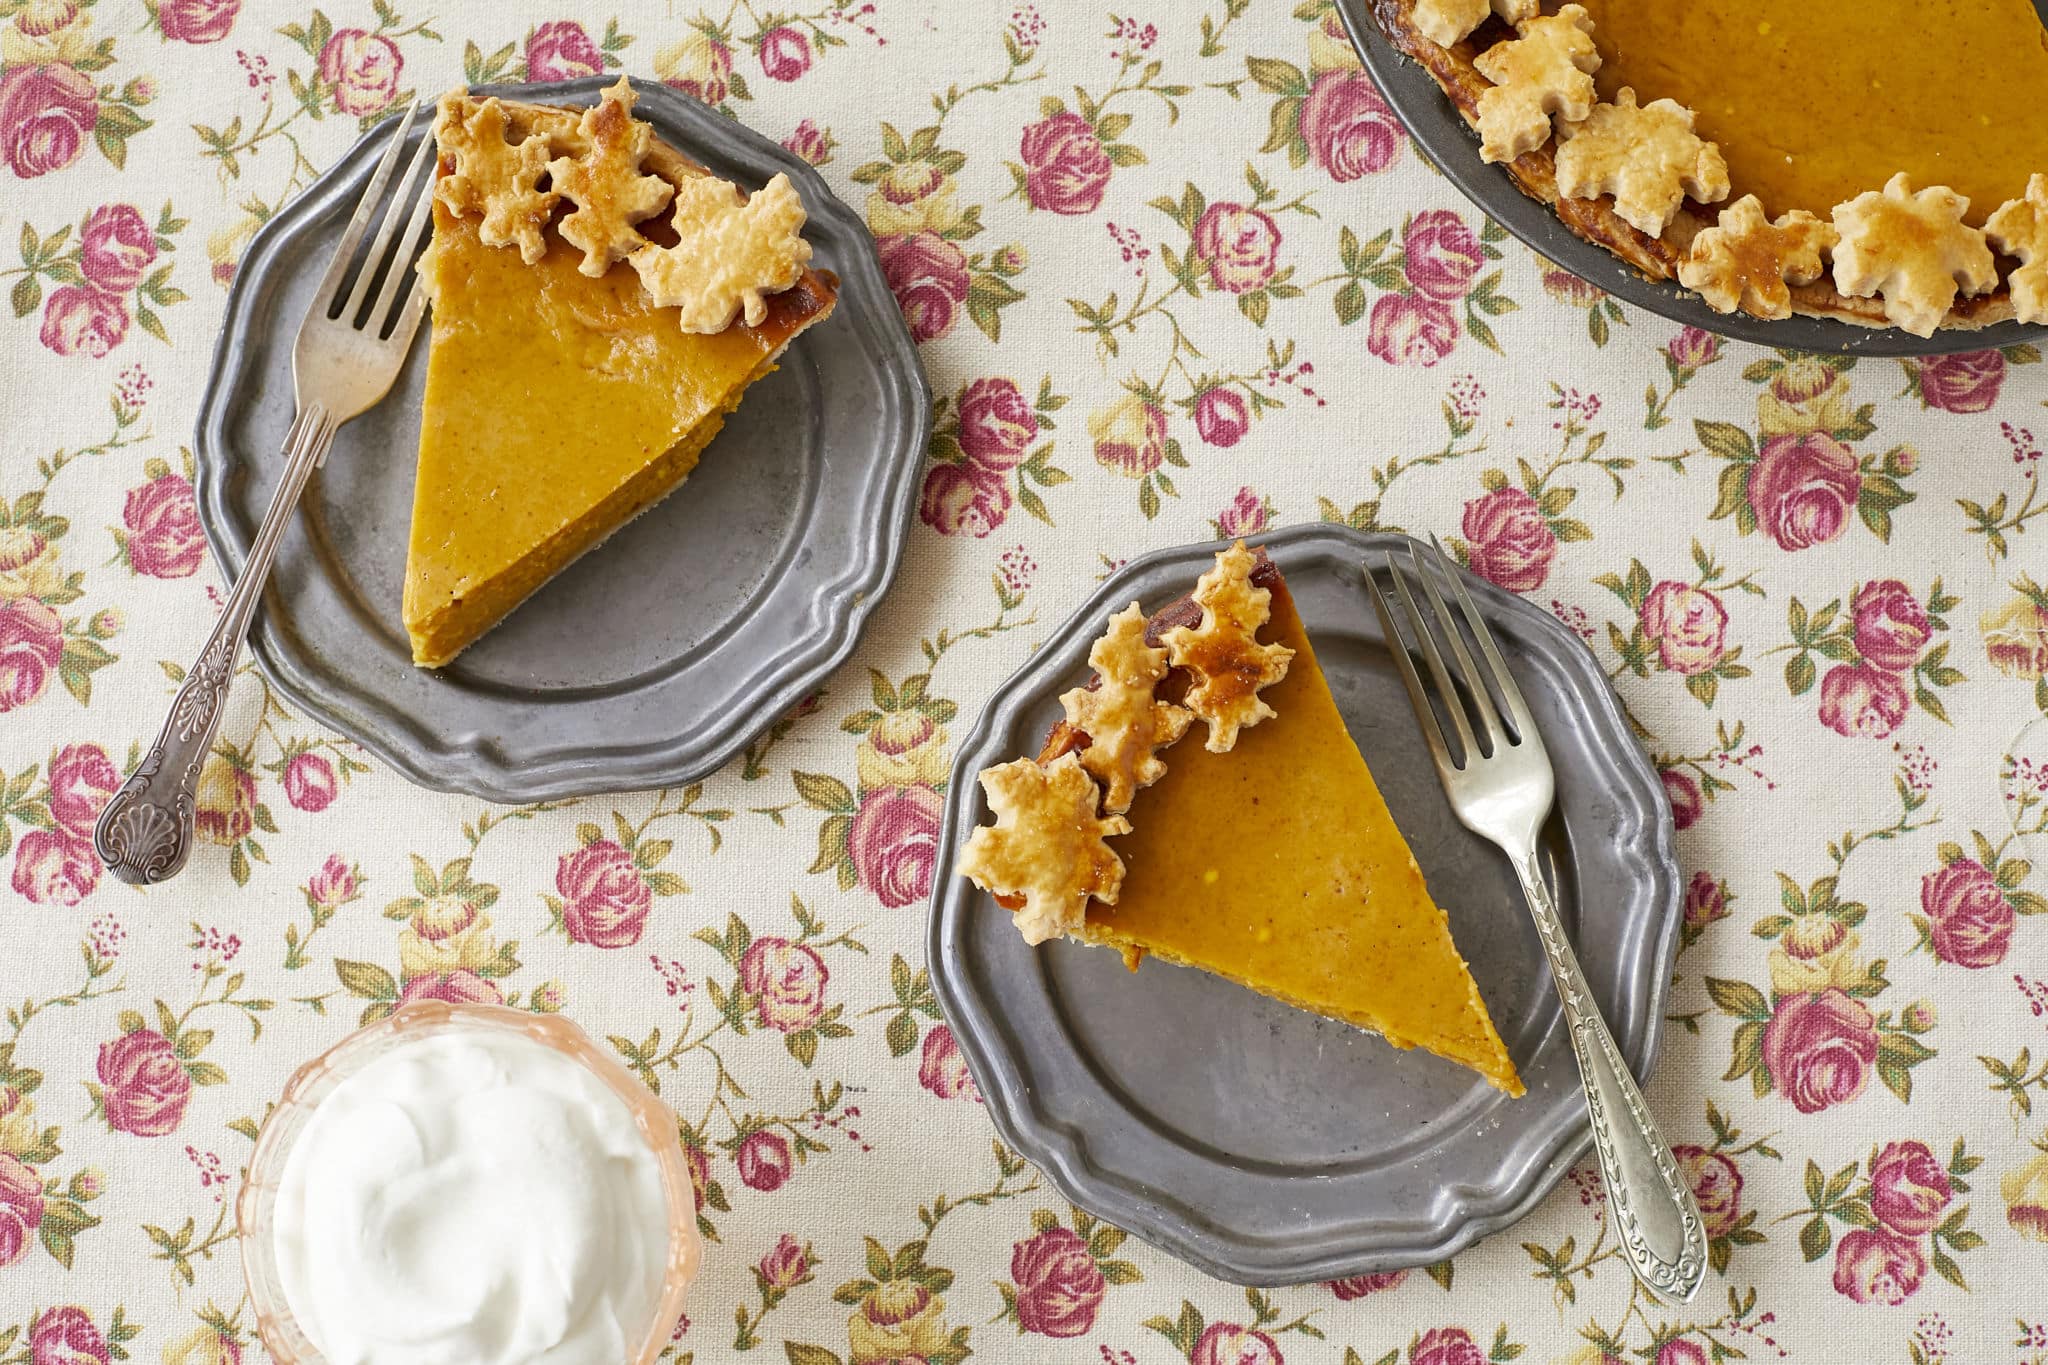 Two slices of homemade pumpkin pie are served on two silver dishes. To the side is a cup of homemade whipped cream.